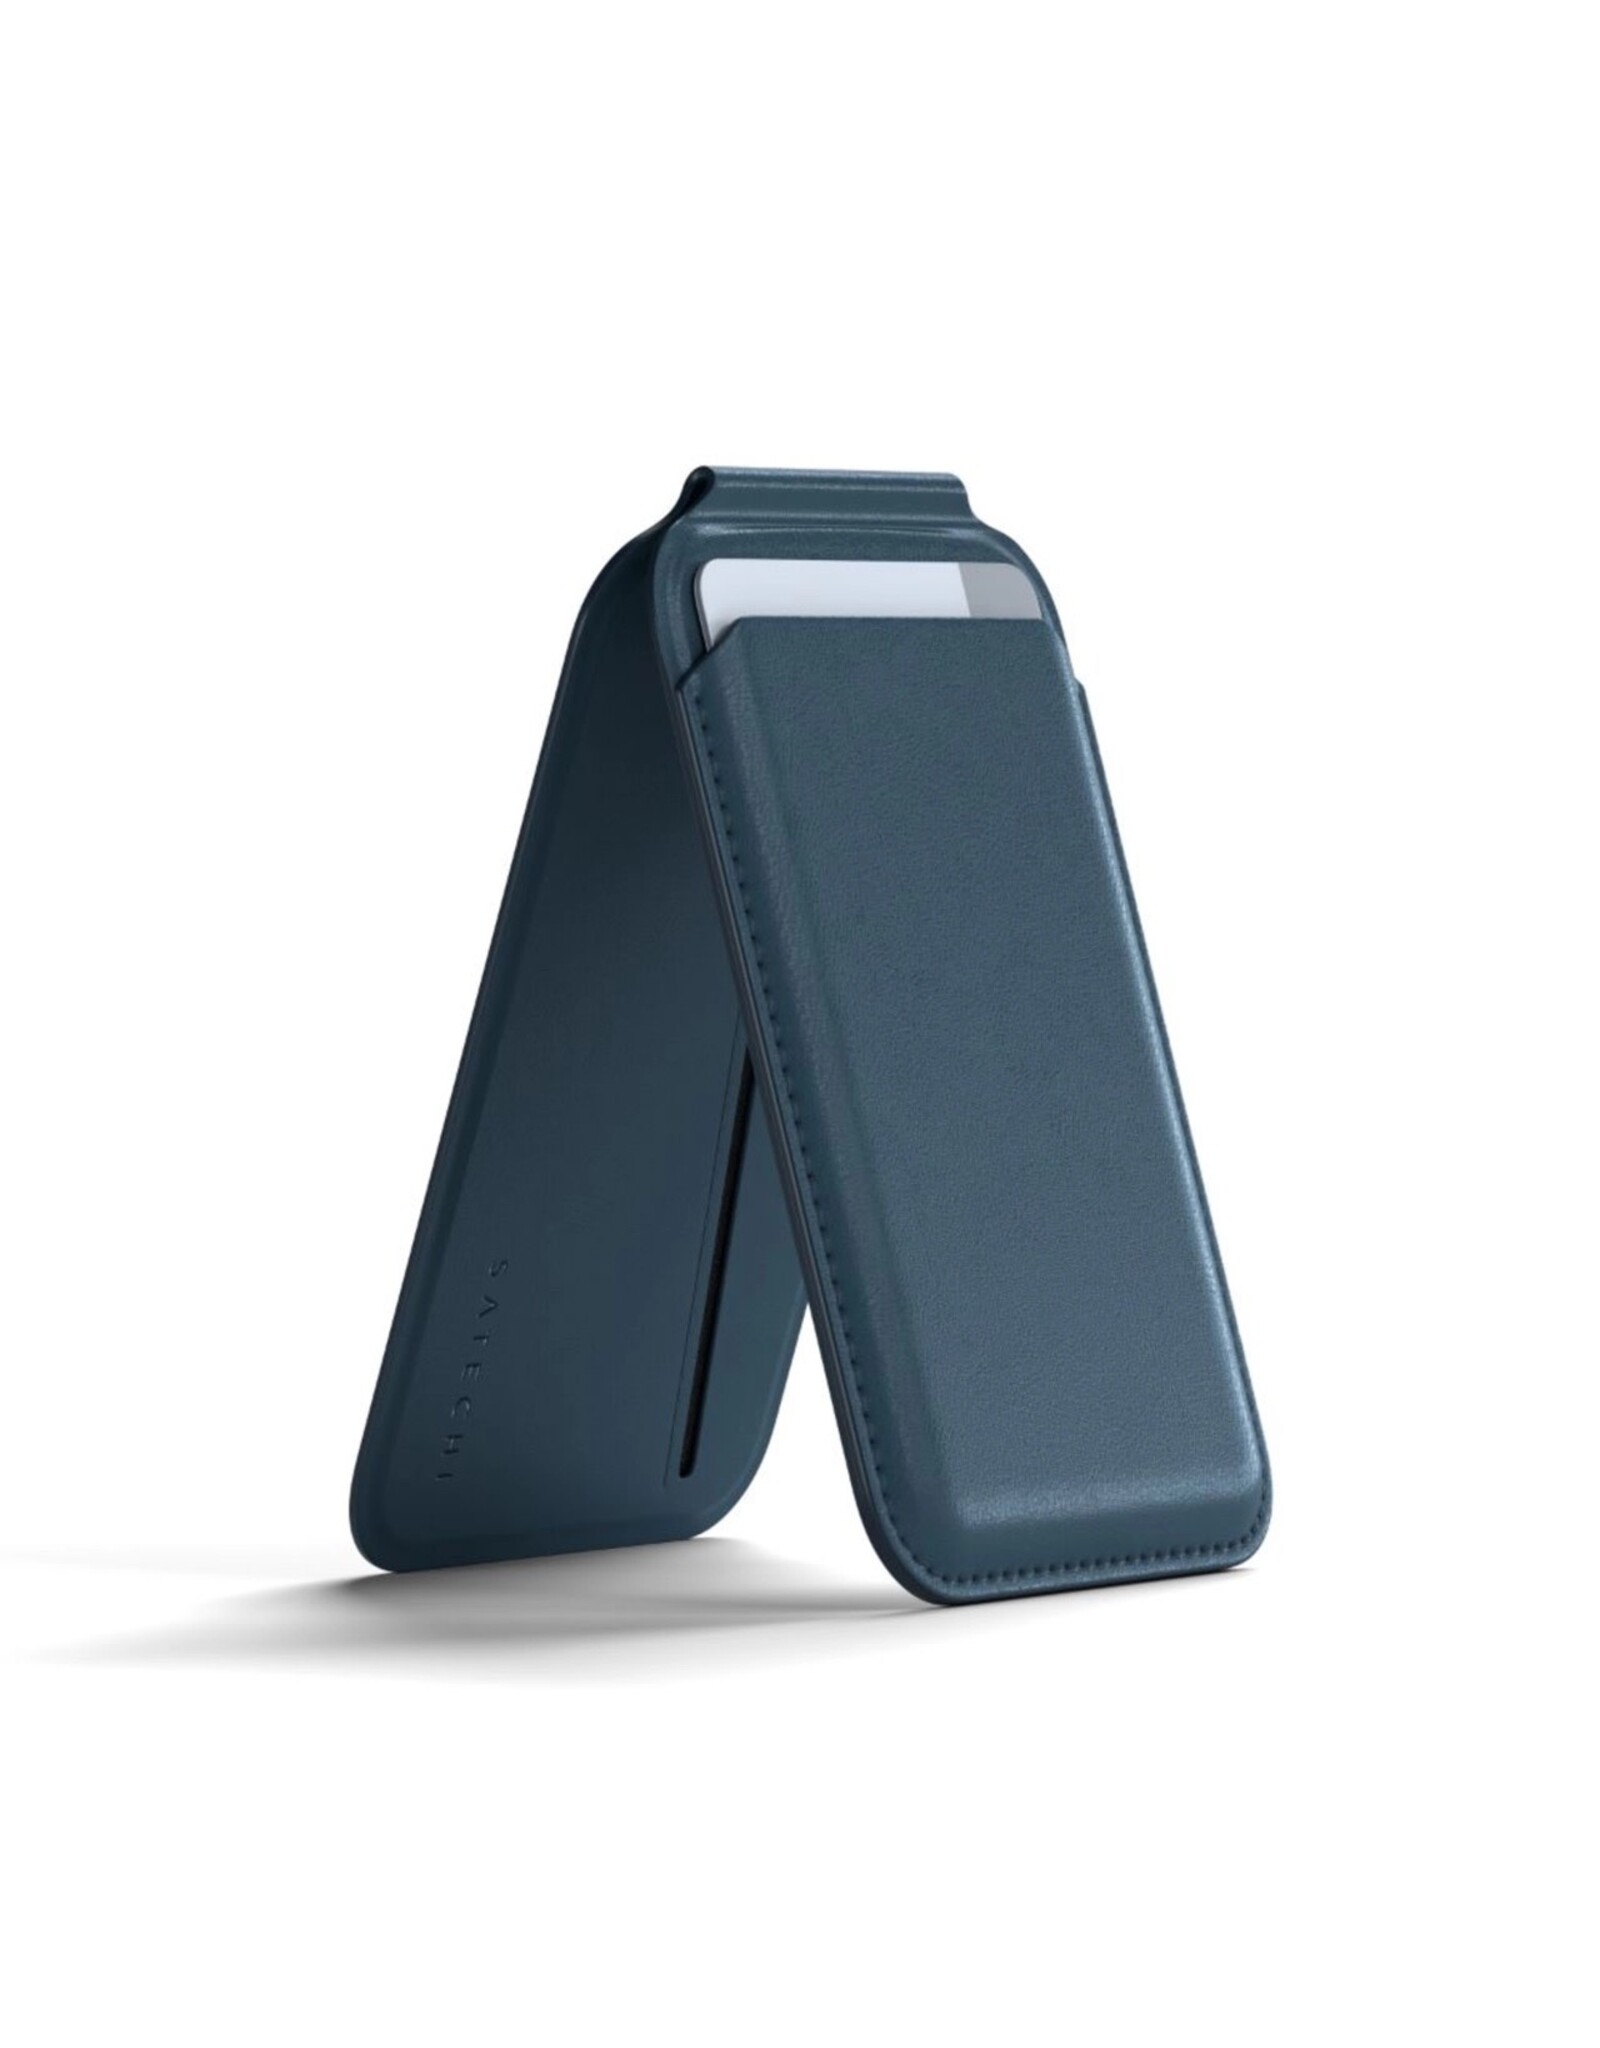 Satechi Satechi Magnetic Wallet Stand For iPhone